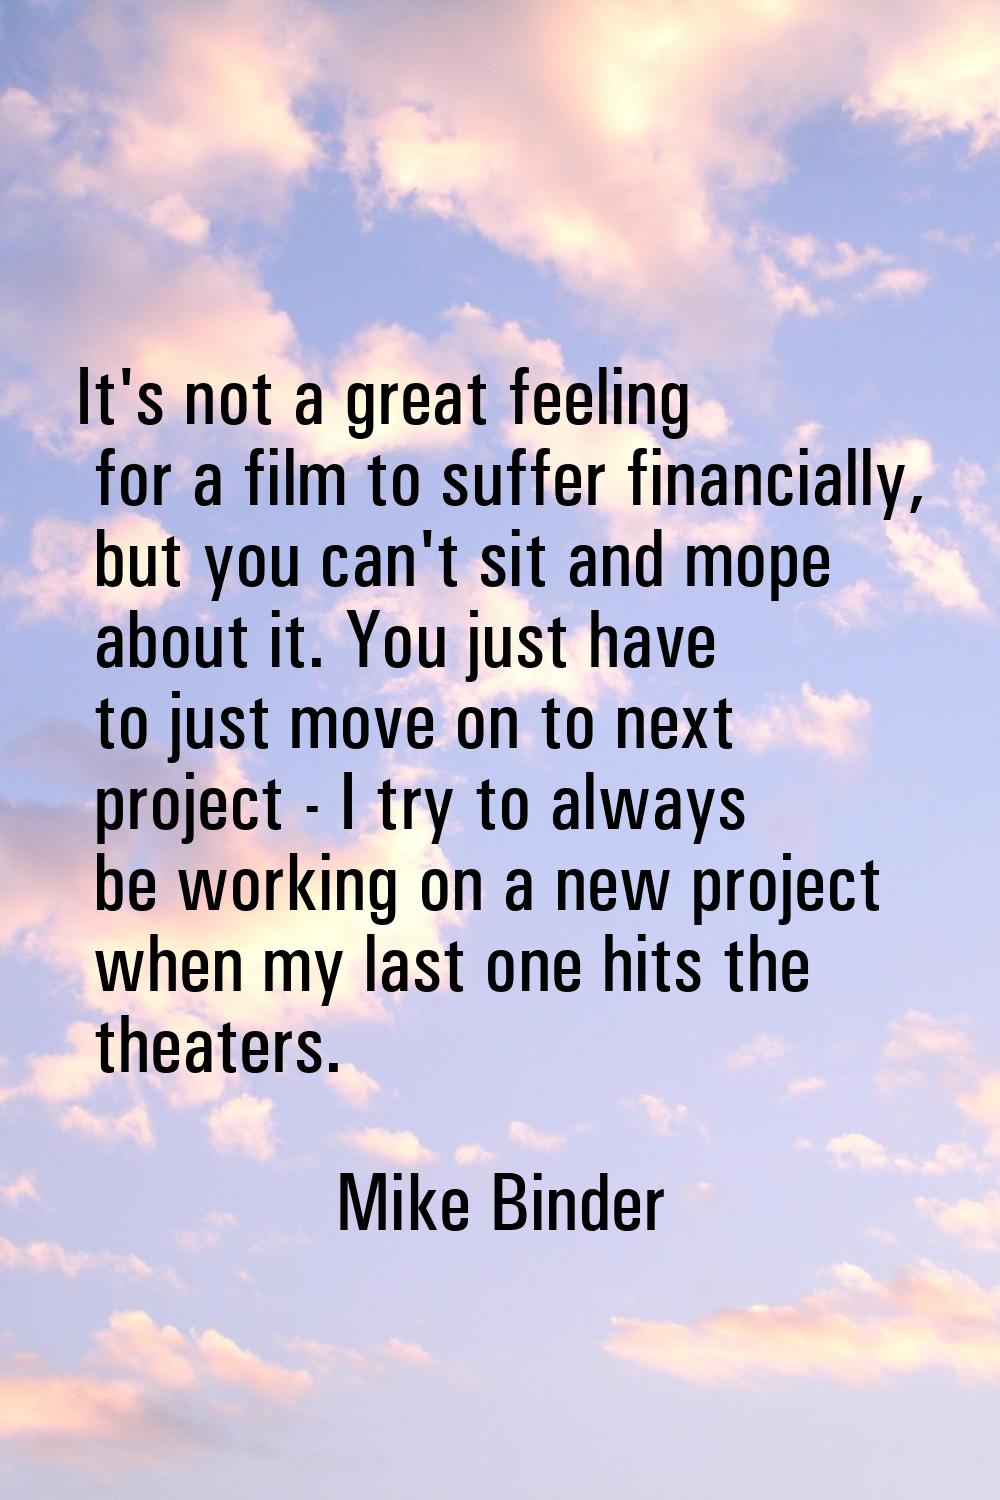 It's not a great feeling for a film to suffer financially, but you can't sit and mope about it. You